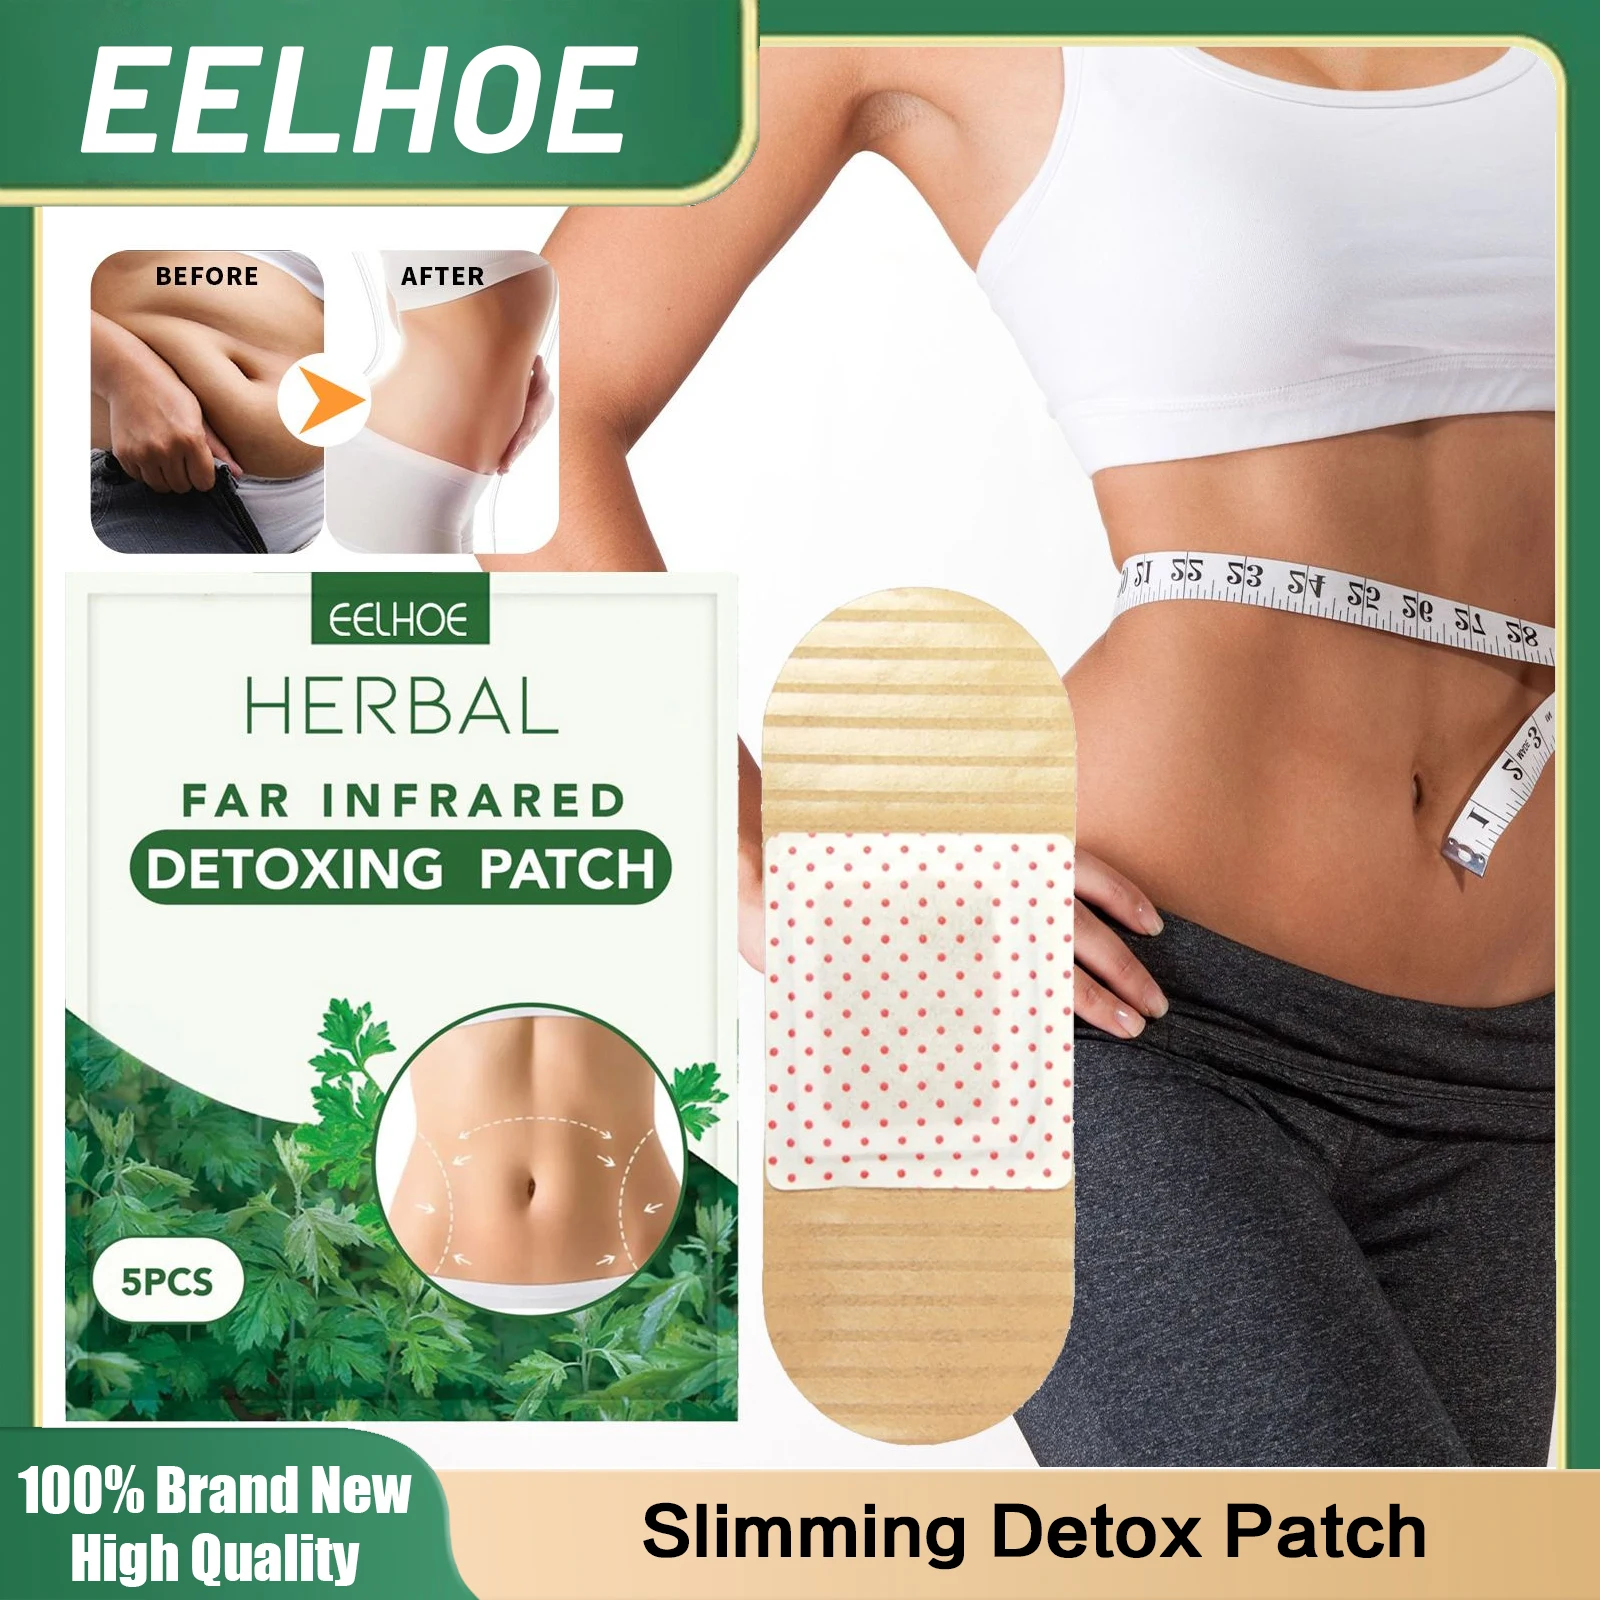 

Slimming Detox Patch Fat Burning Belly Abdomen Weight Loss for Women Tightening Body Sculpting Cellulite Reduction Sticker 5pcs